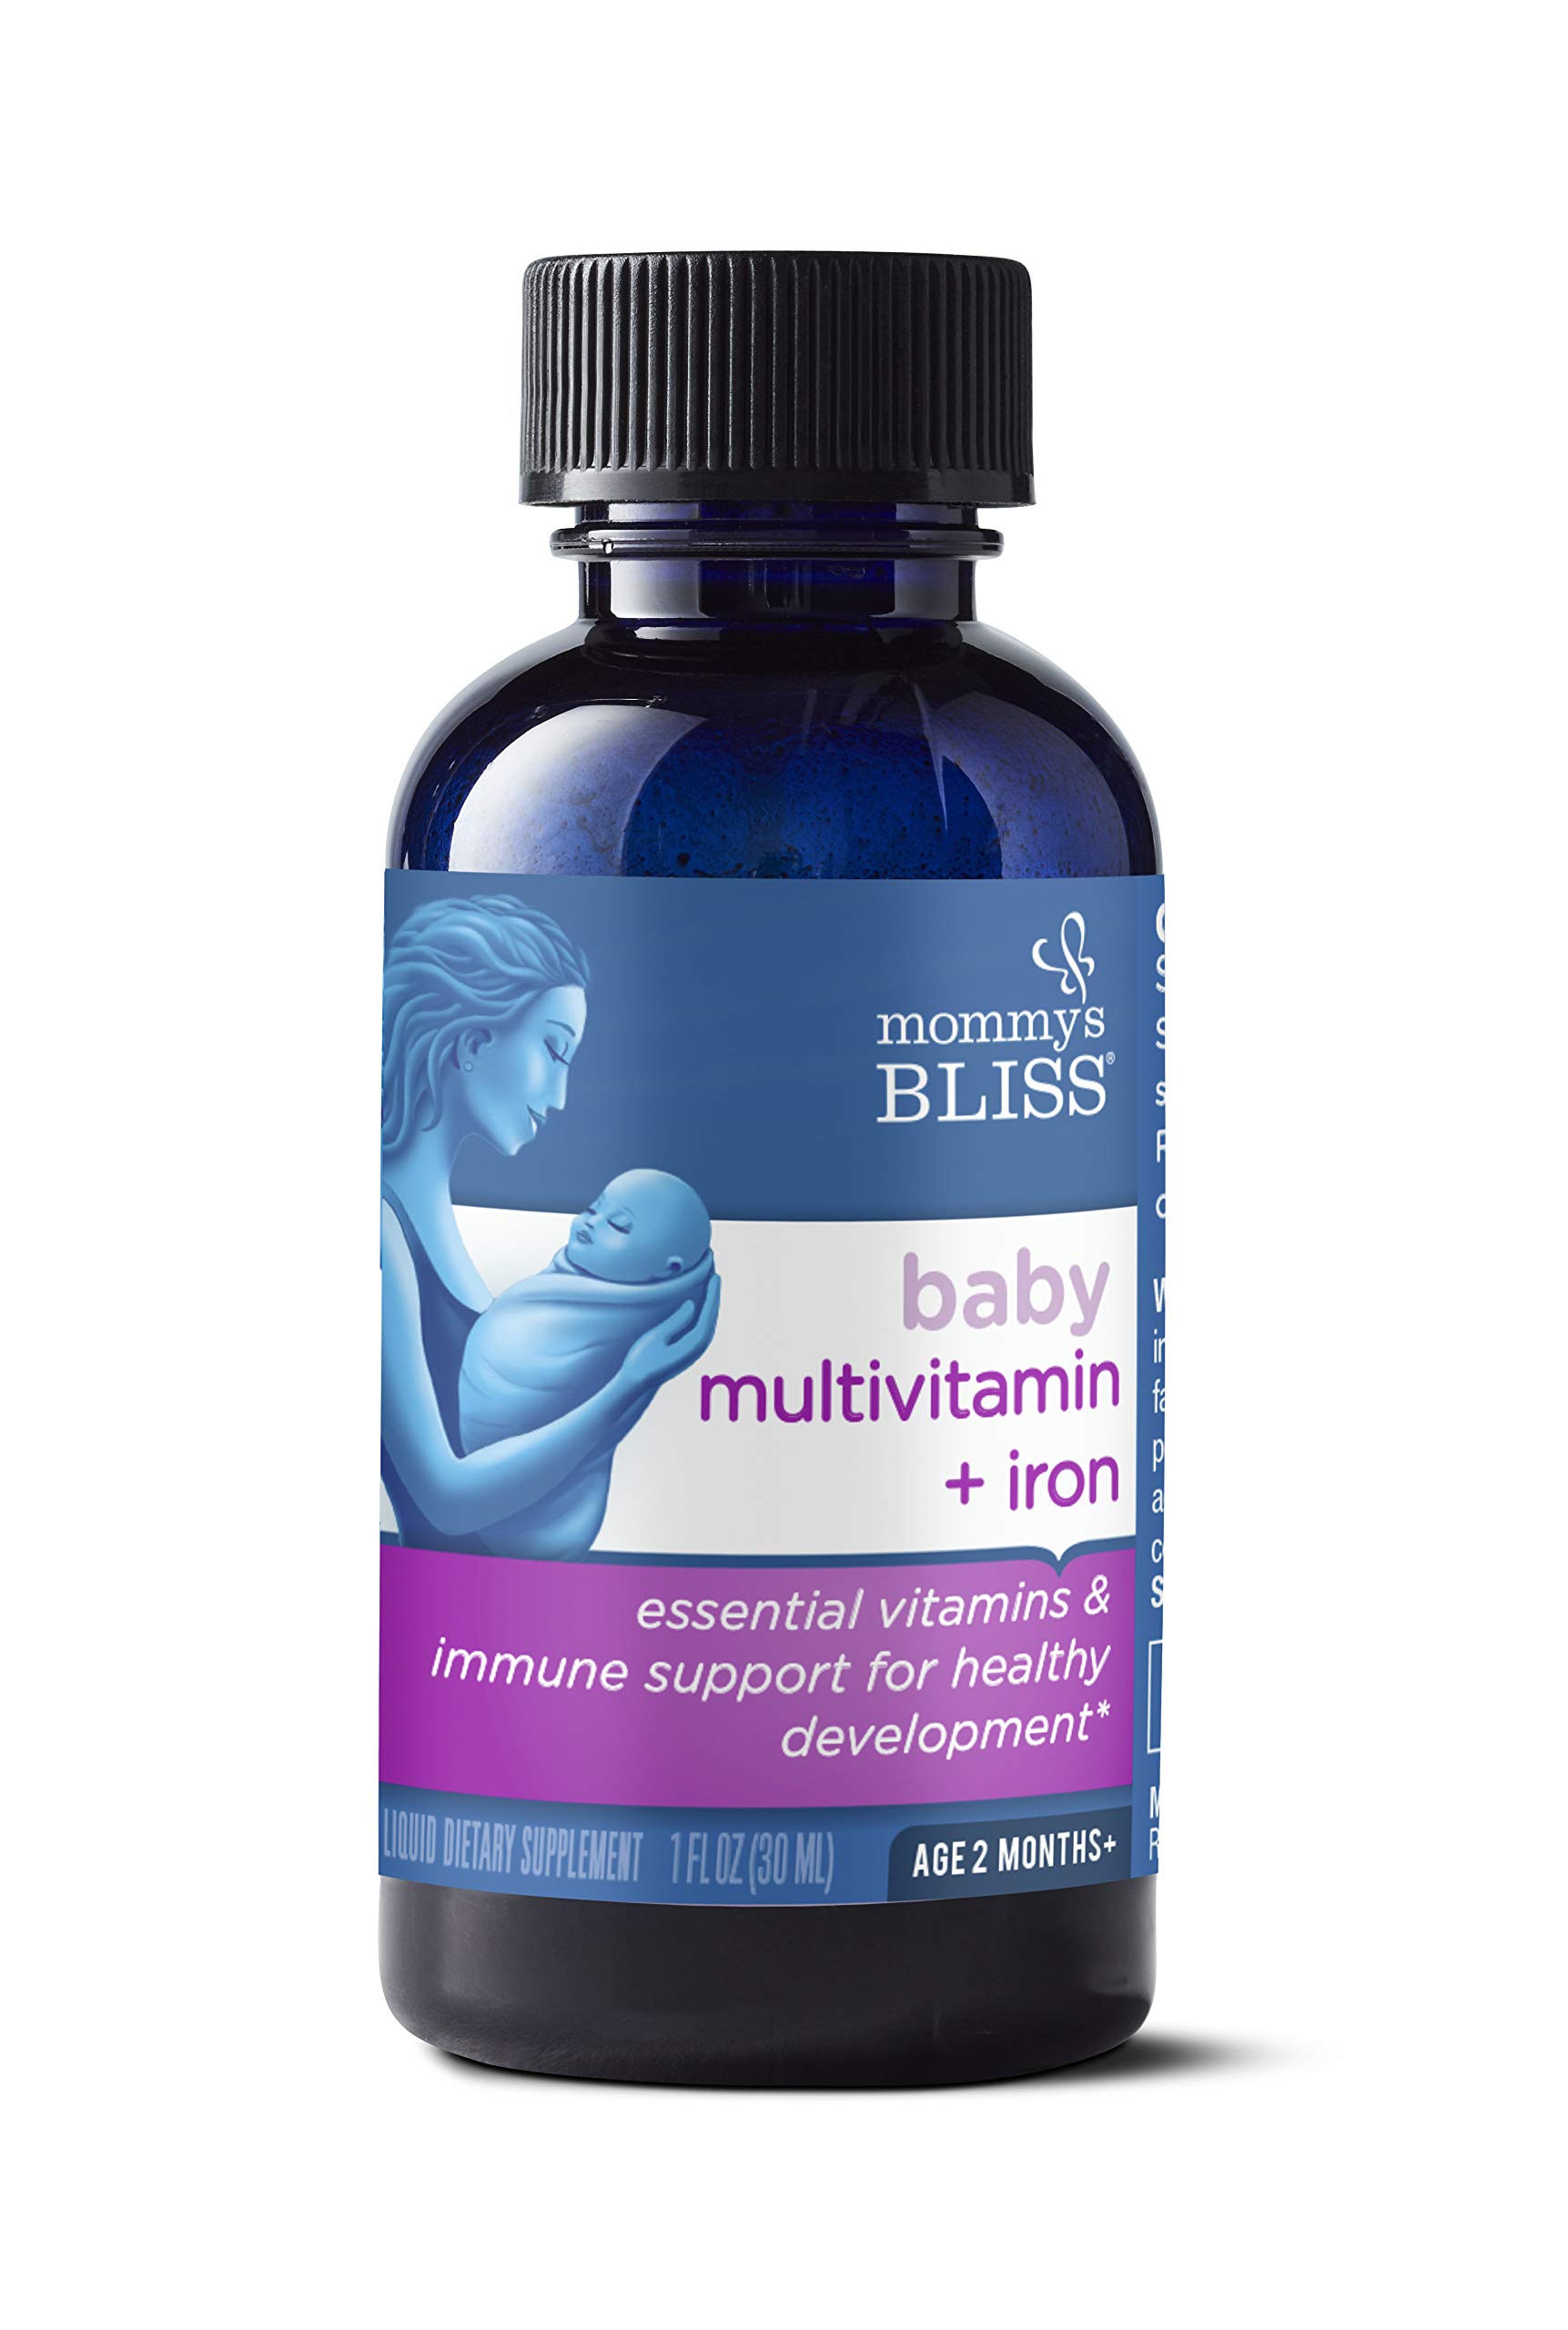 Mommy's Bliss Baby Multivitamin + Iron, Daily Essential Vitamins for Immune Support, Healthy Growth & Bone Development*, Age 2 Months+, 30 ml, Liquid